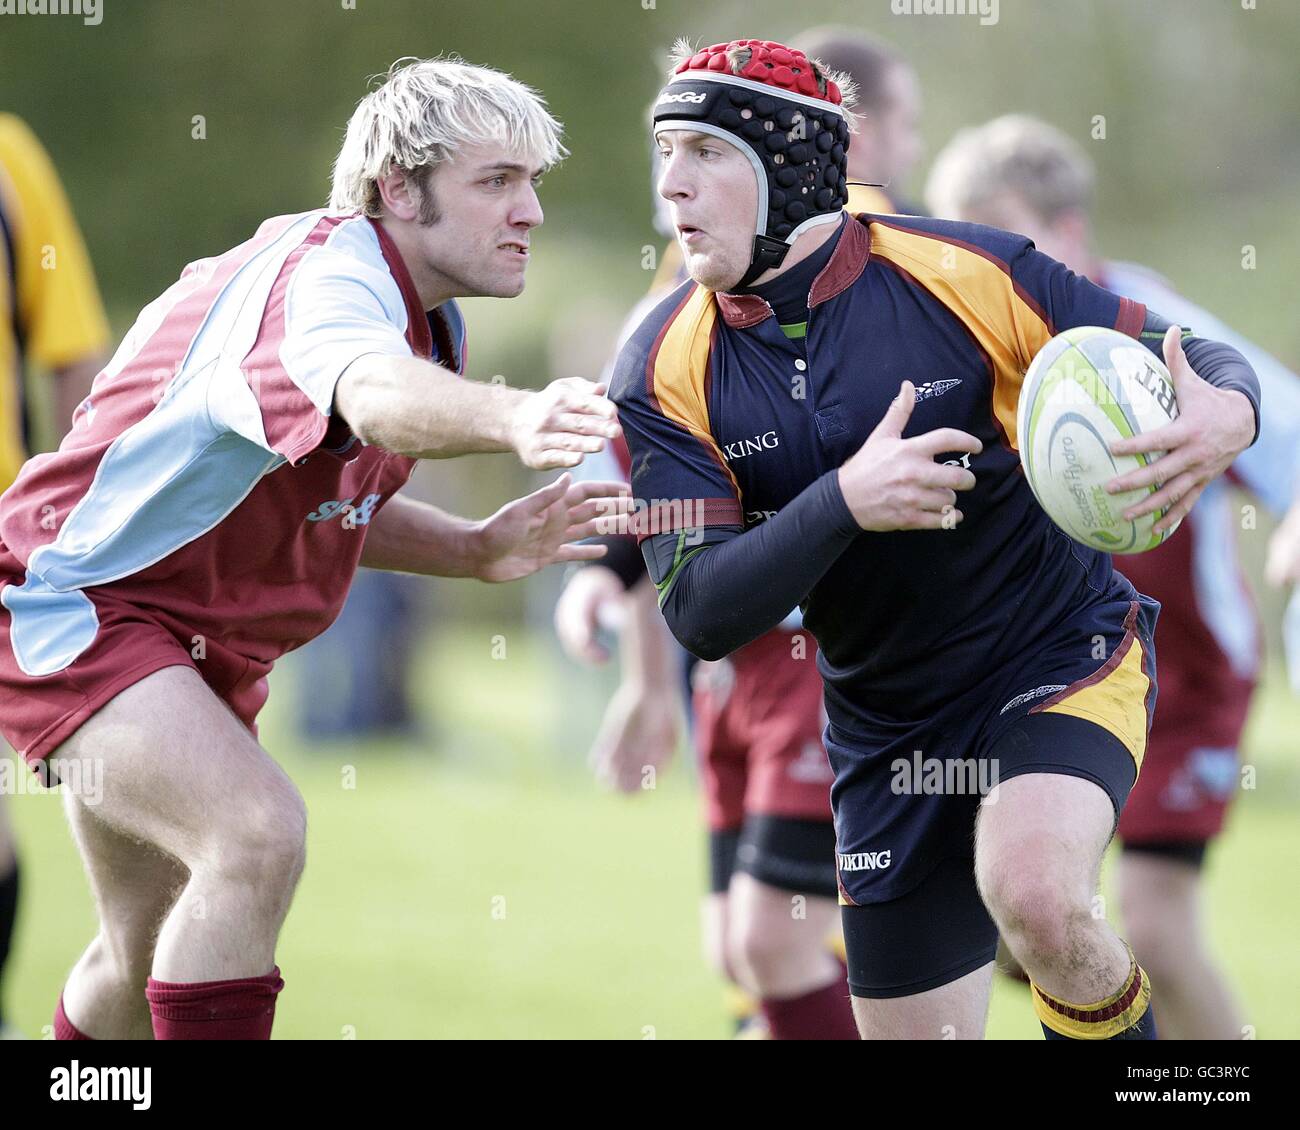 Rugby Union - Scottish Hydro East - St Boswells / Queensferry - St Boswells.Andrew Donaldson de St Boswells (à gauche) s'attaque à Allan Carson Jr de Queensferry dans le match Scottish Hydro East 2 à St Boswells, Melrose. Banque D'Images